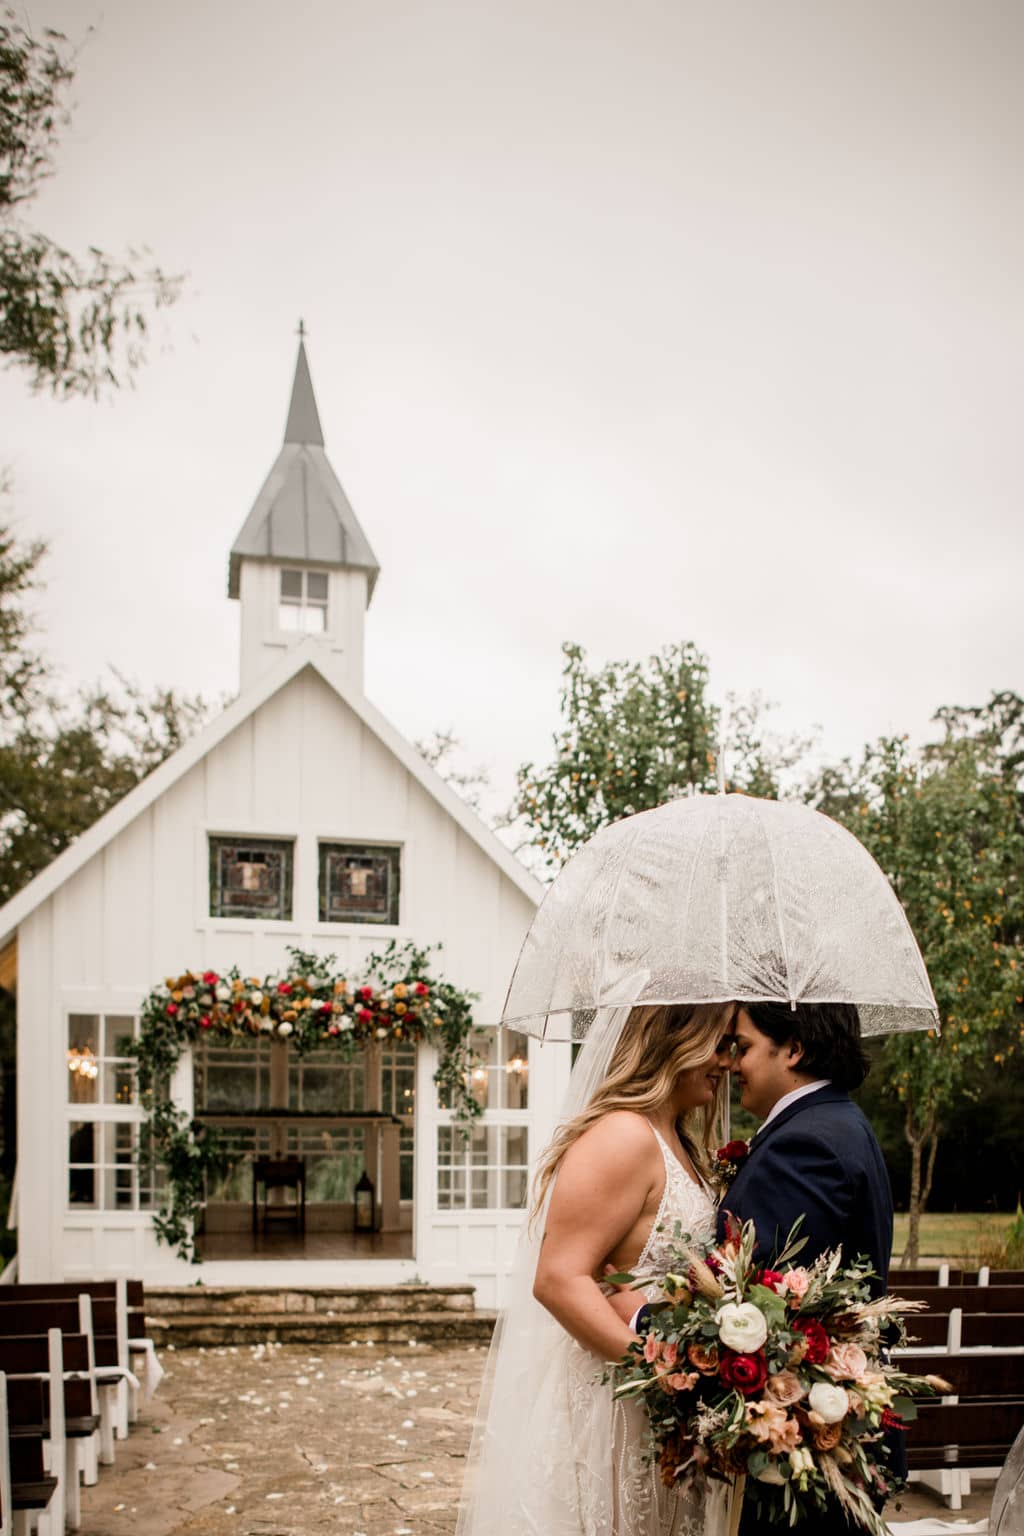 the bride and groom are kissing in the rain while holding up the bridal bouquet designed by urban rubbish